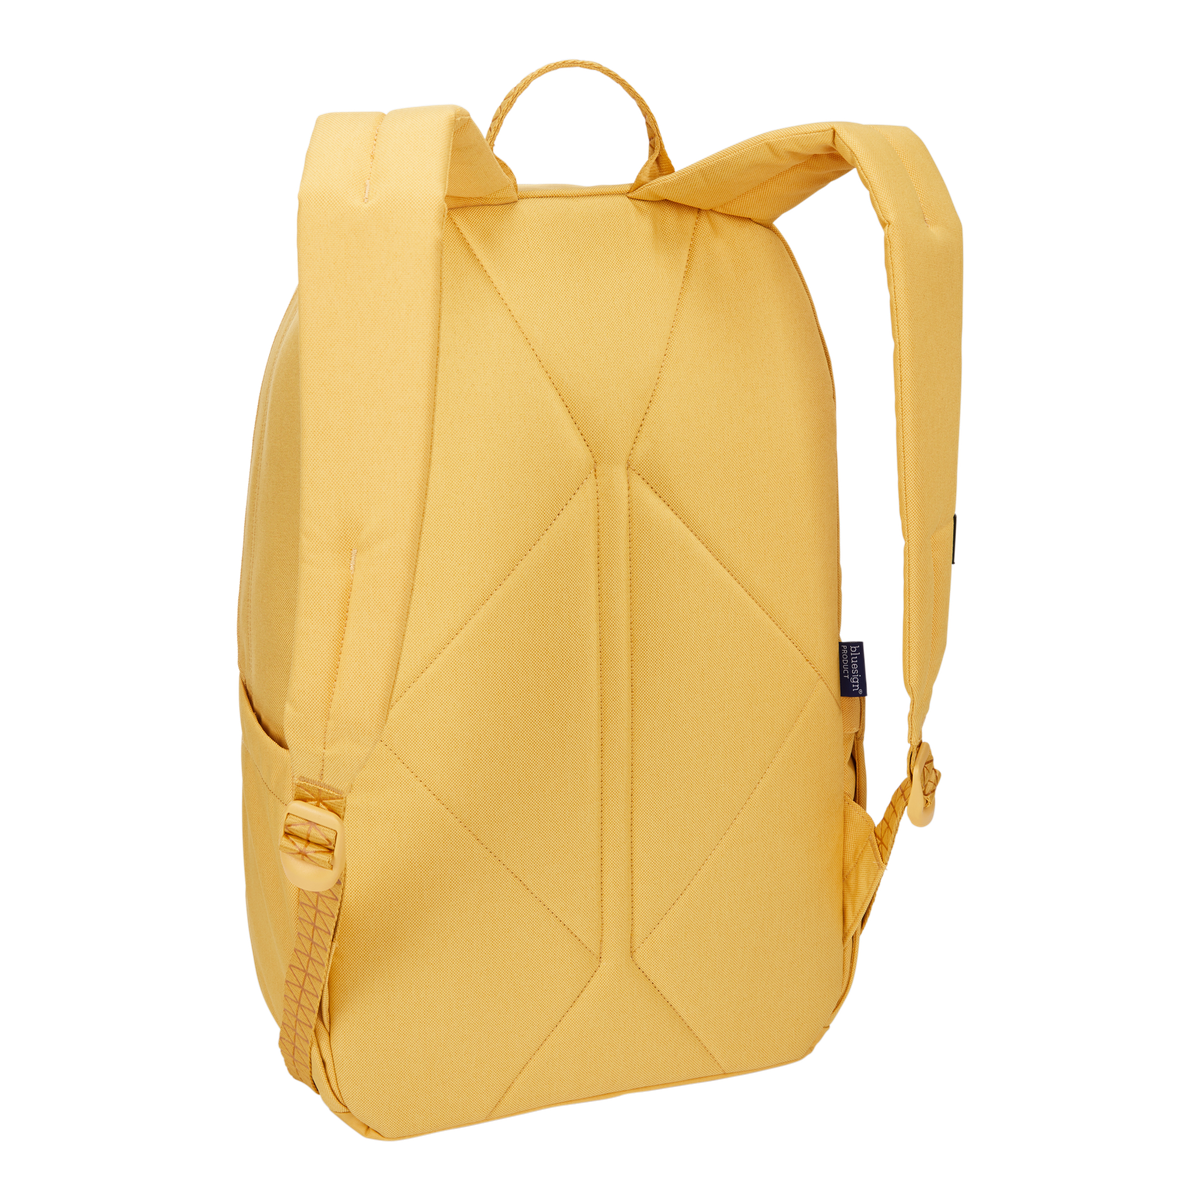 Thule Indago backpack 23L ochre yellow